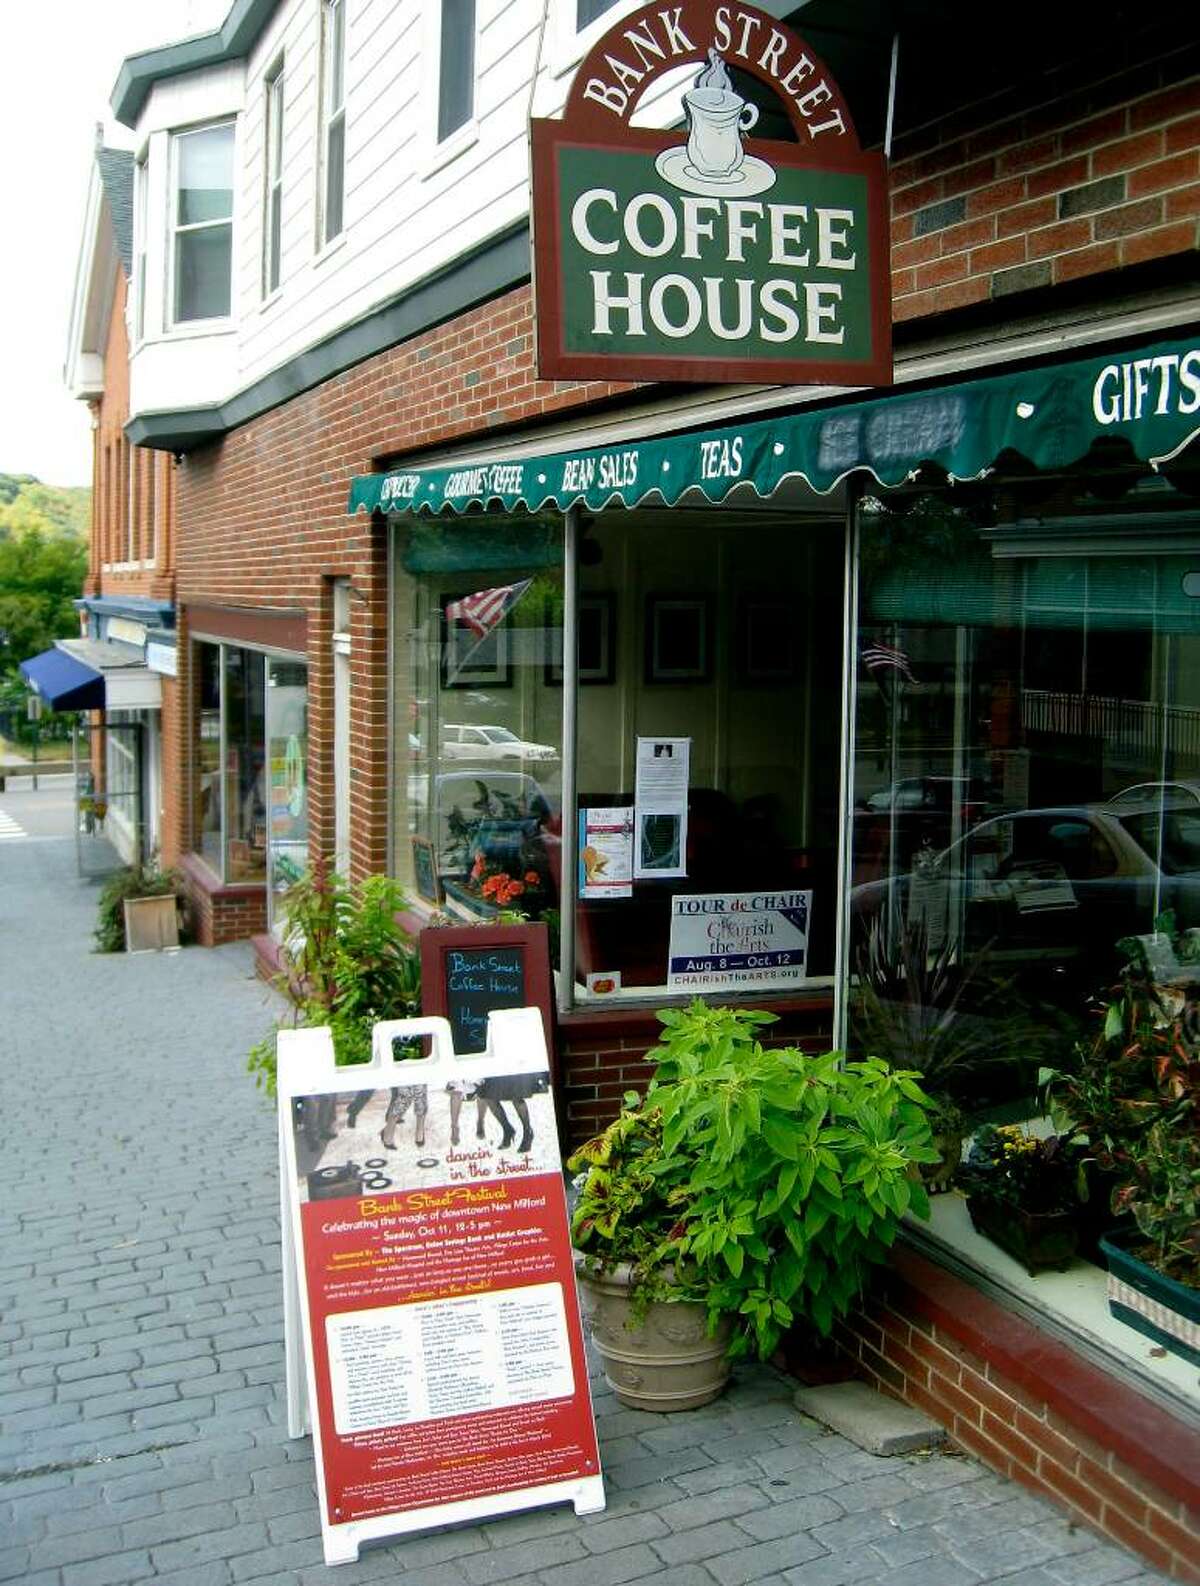 SPECTRUM/The Bank Street Coffee House on Bank Street in New Milford is under new ownership from Dina Ferrante and Ralph Landi, September 2009. Photo by Norm Cummings